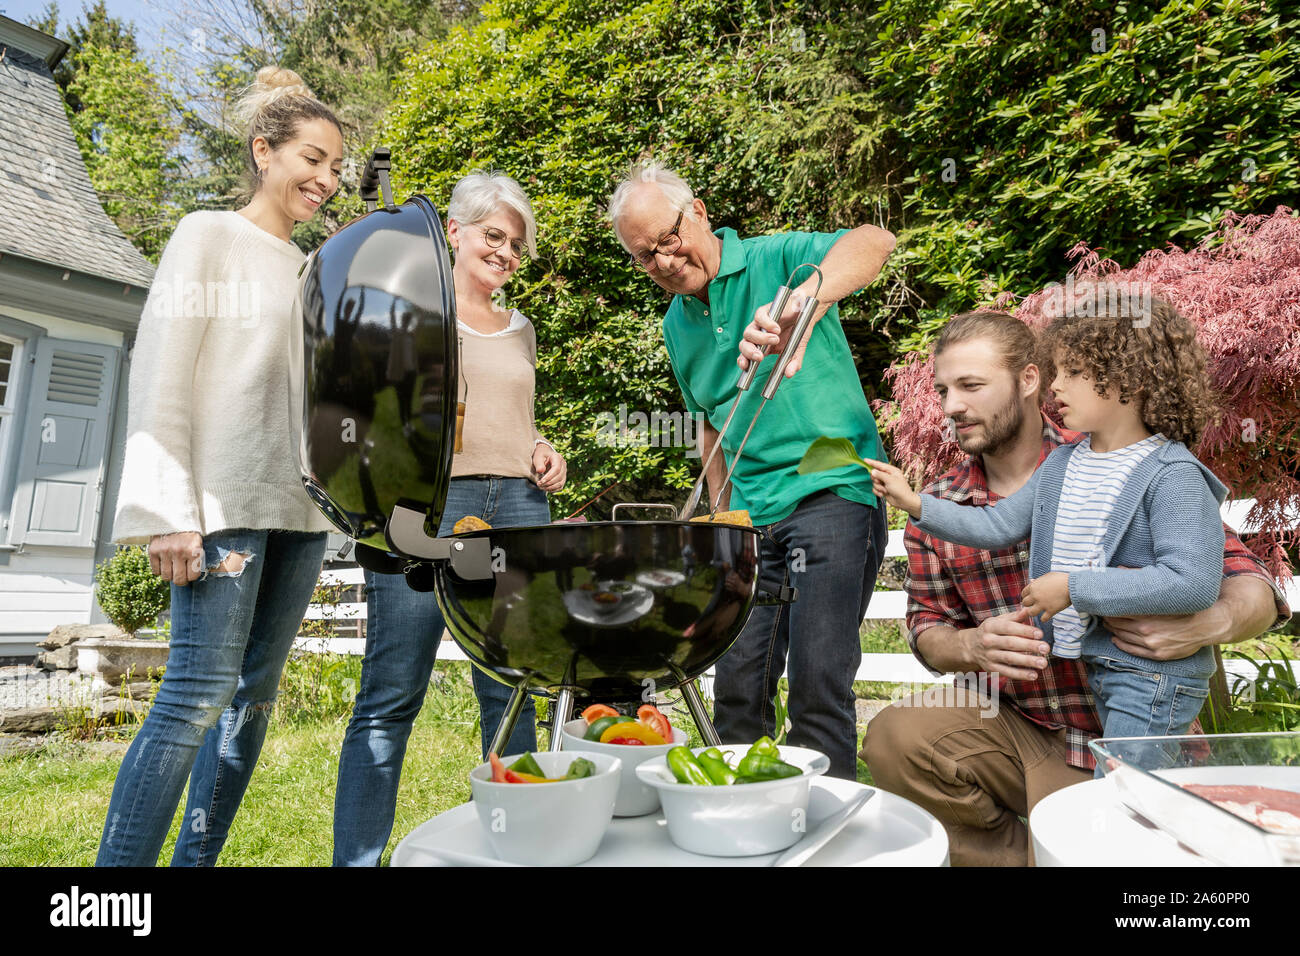 Extended family having a barbecue in garden Stock Photo